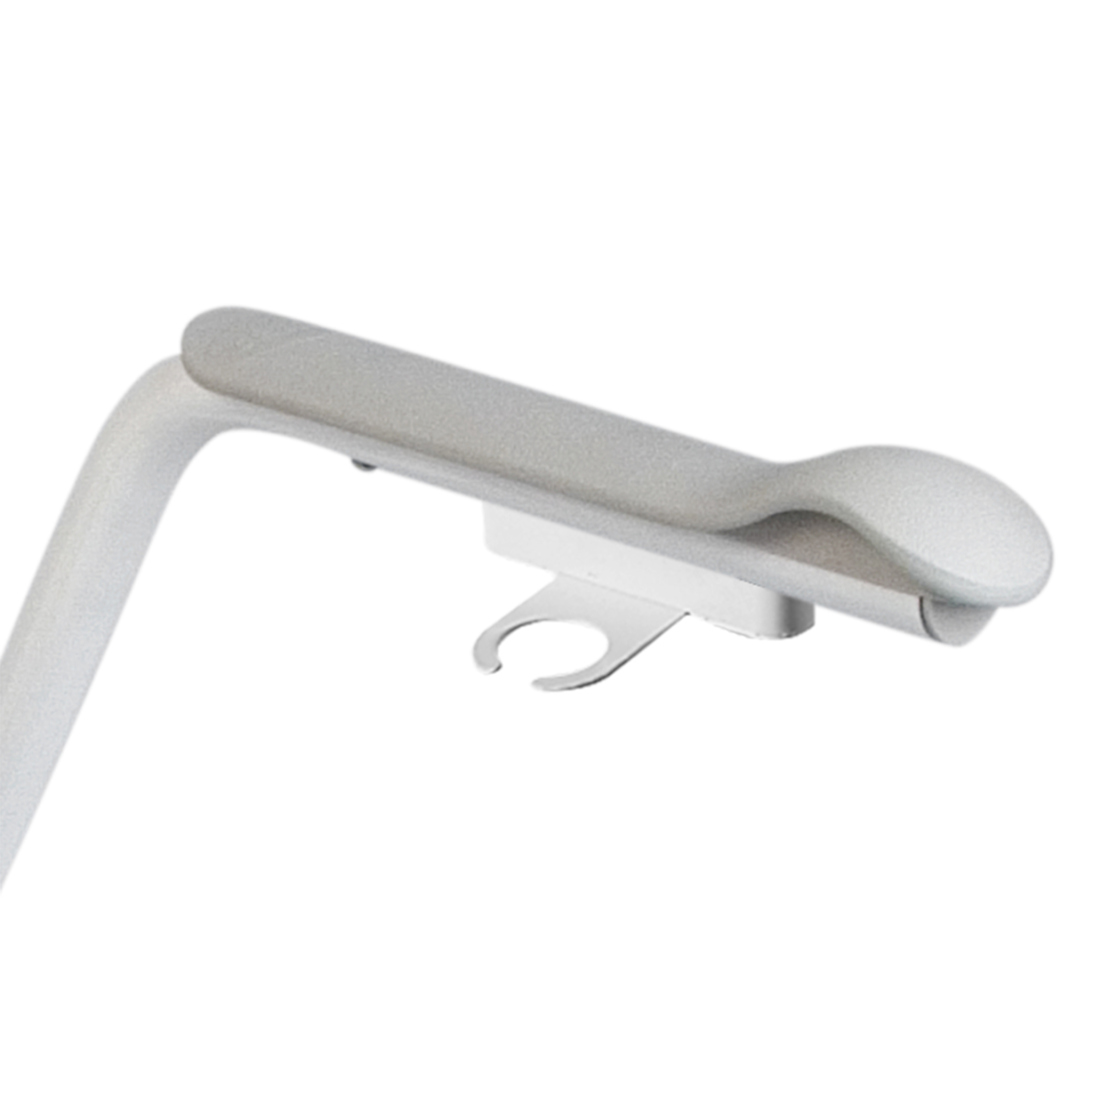 Etac Supporter adjustable arm supports signal